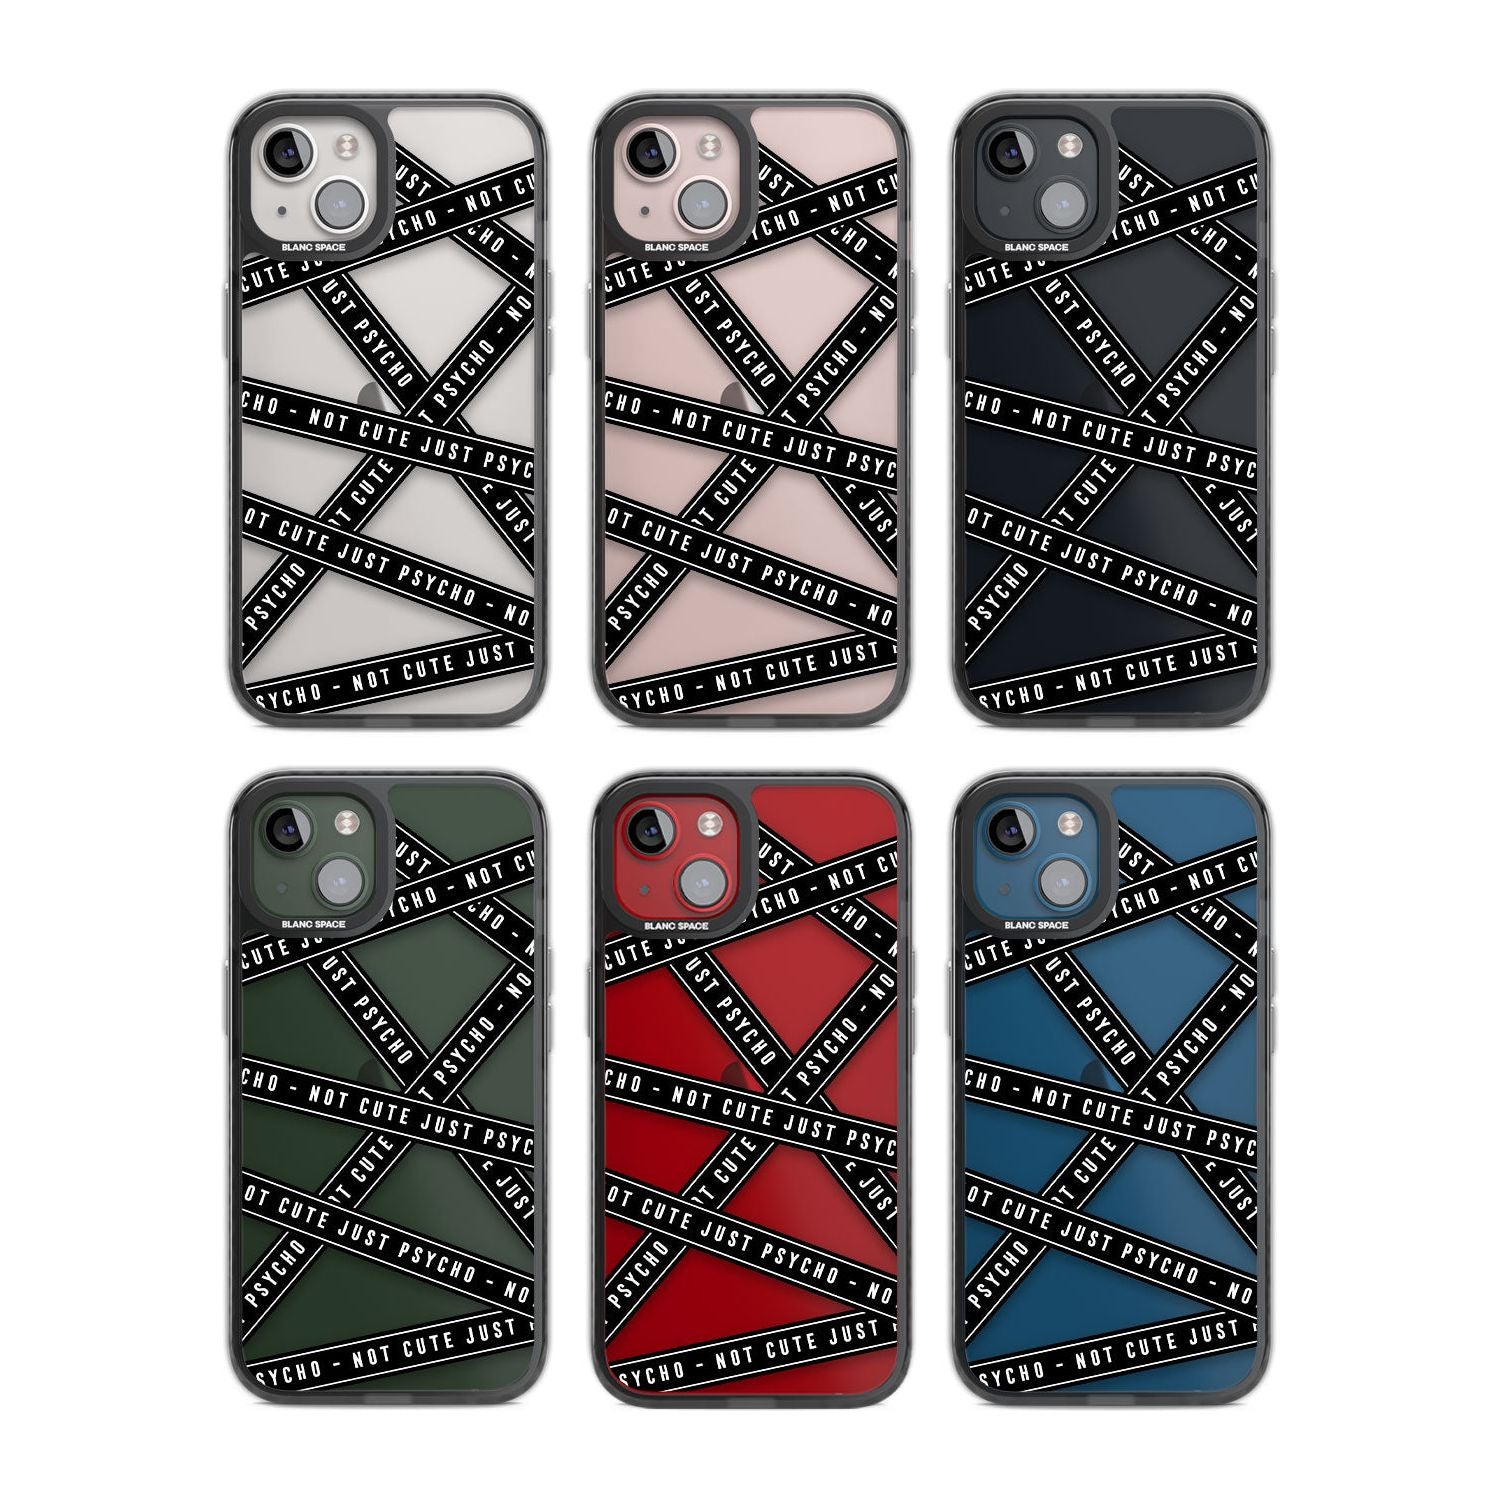 Caution Tape (Clear) Not Cute Just Psycho Phone Case iPhone 15 Pro Max / Black Impact Case,iPhone 15 Plus / Black Impact Case,iPhone 15 Pro / Black Impact Case,iPhone 15 / Black Impact Case,iPhone 15 Pro Max / Impact Case,iPhone 15 Plus / Impact Case,iPhone 15 Pro / Impact Case,iPhone 15 / Impact Case,iPhone 15 Pro Max / Magsafe Black Impact Case,iPhone 15 Plus / Magsafe Black Impact Case,iPhone 15 Pro / Magsafe Black Impact Case,iPhone 15 / Magsafe Black Impact Case,iPhone 14 Pro Max / Black Impact Case,iP